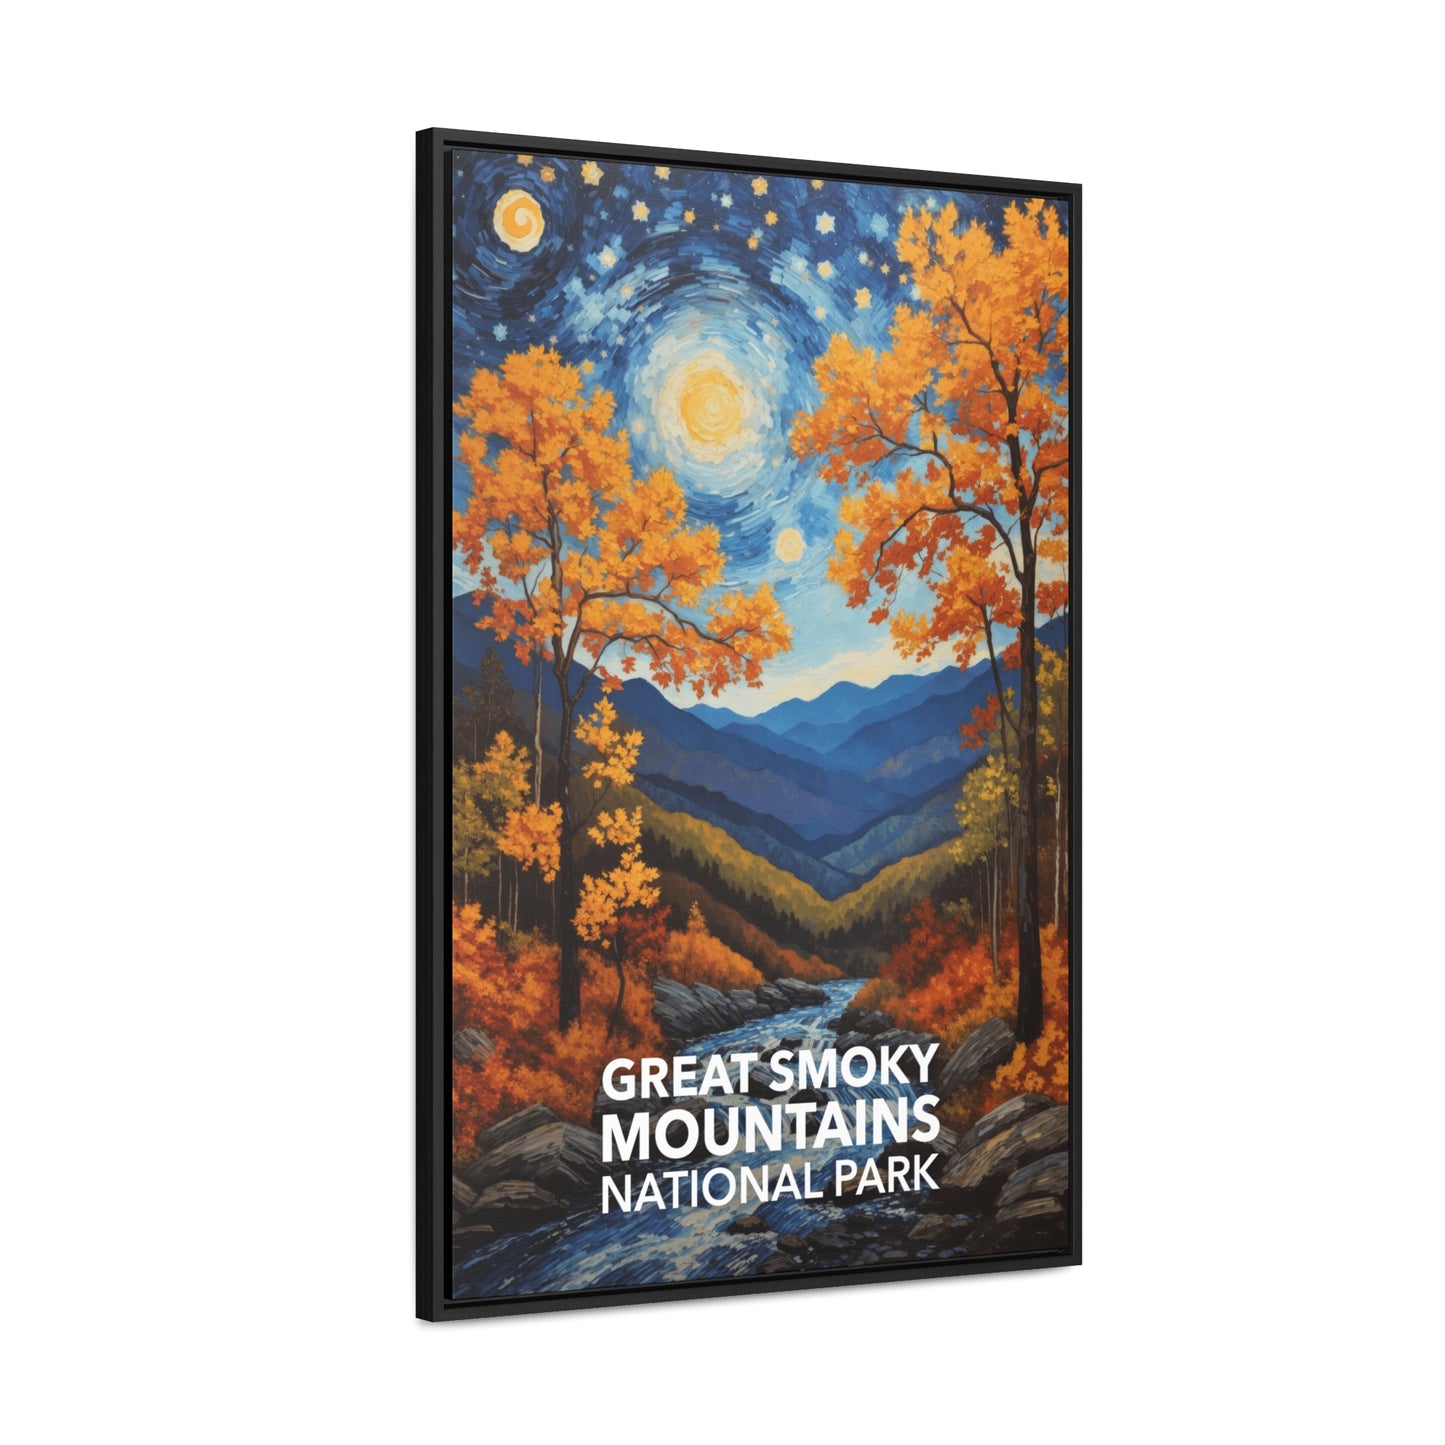 Great Smoky Mountains National Park Framed Canvas - The Starry Night